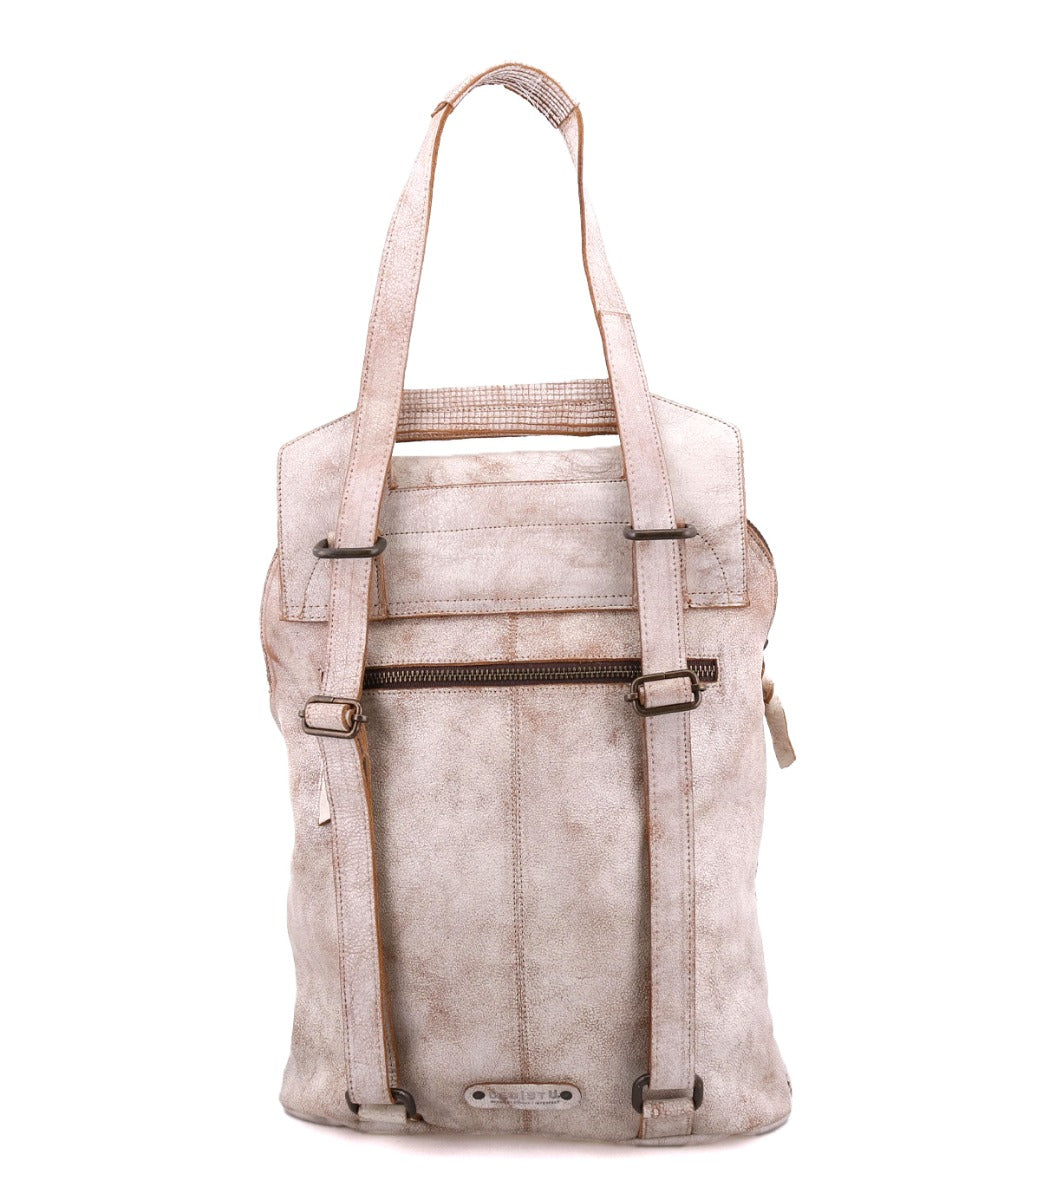 A white leather Patsy bag by Bed Stu with two straps and a zipper.